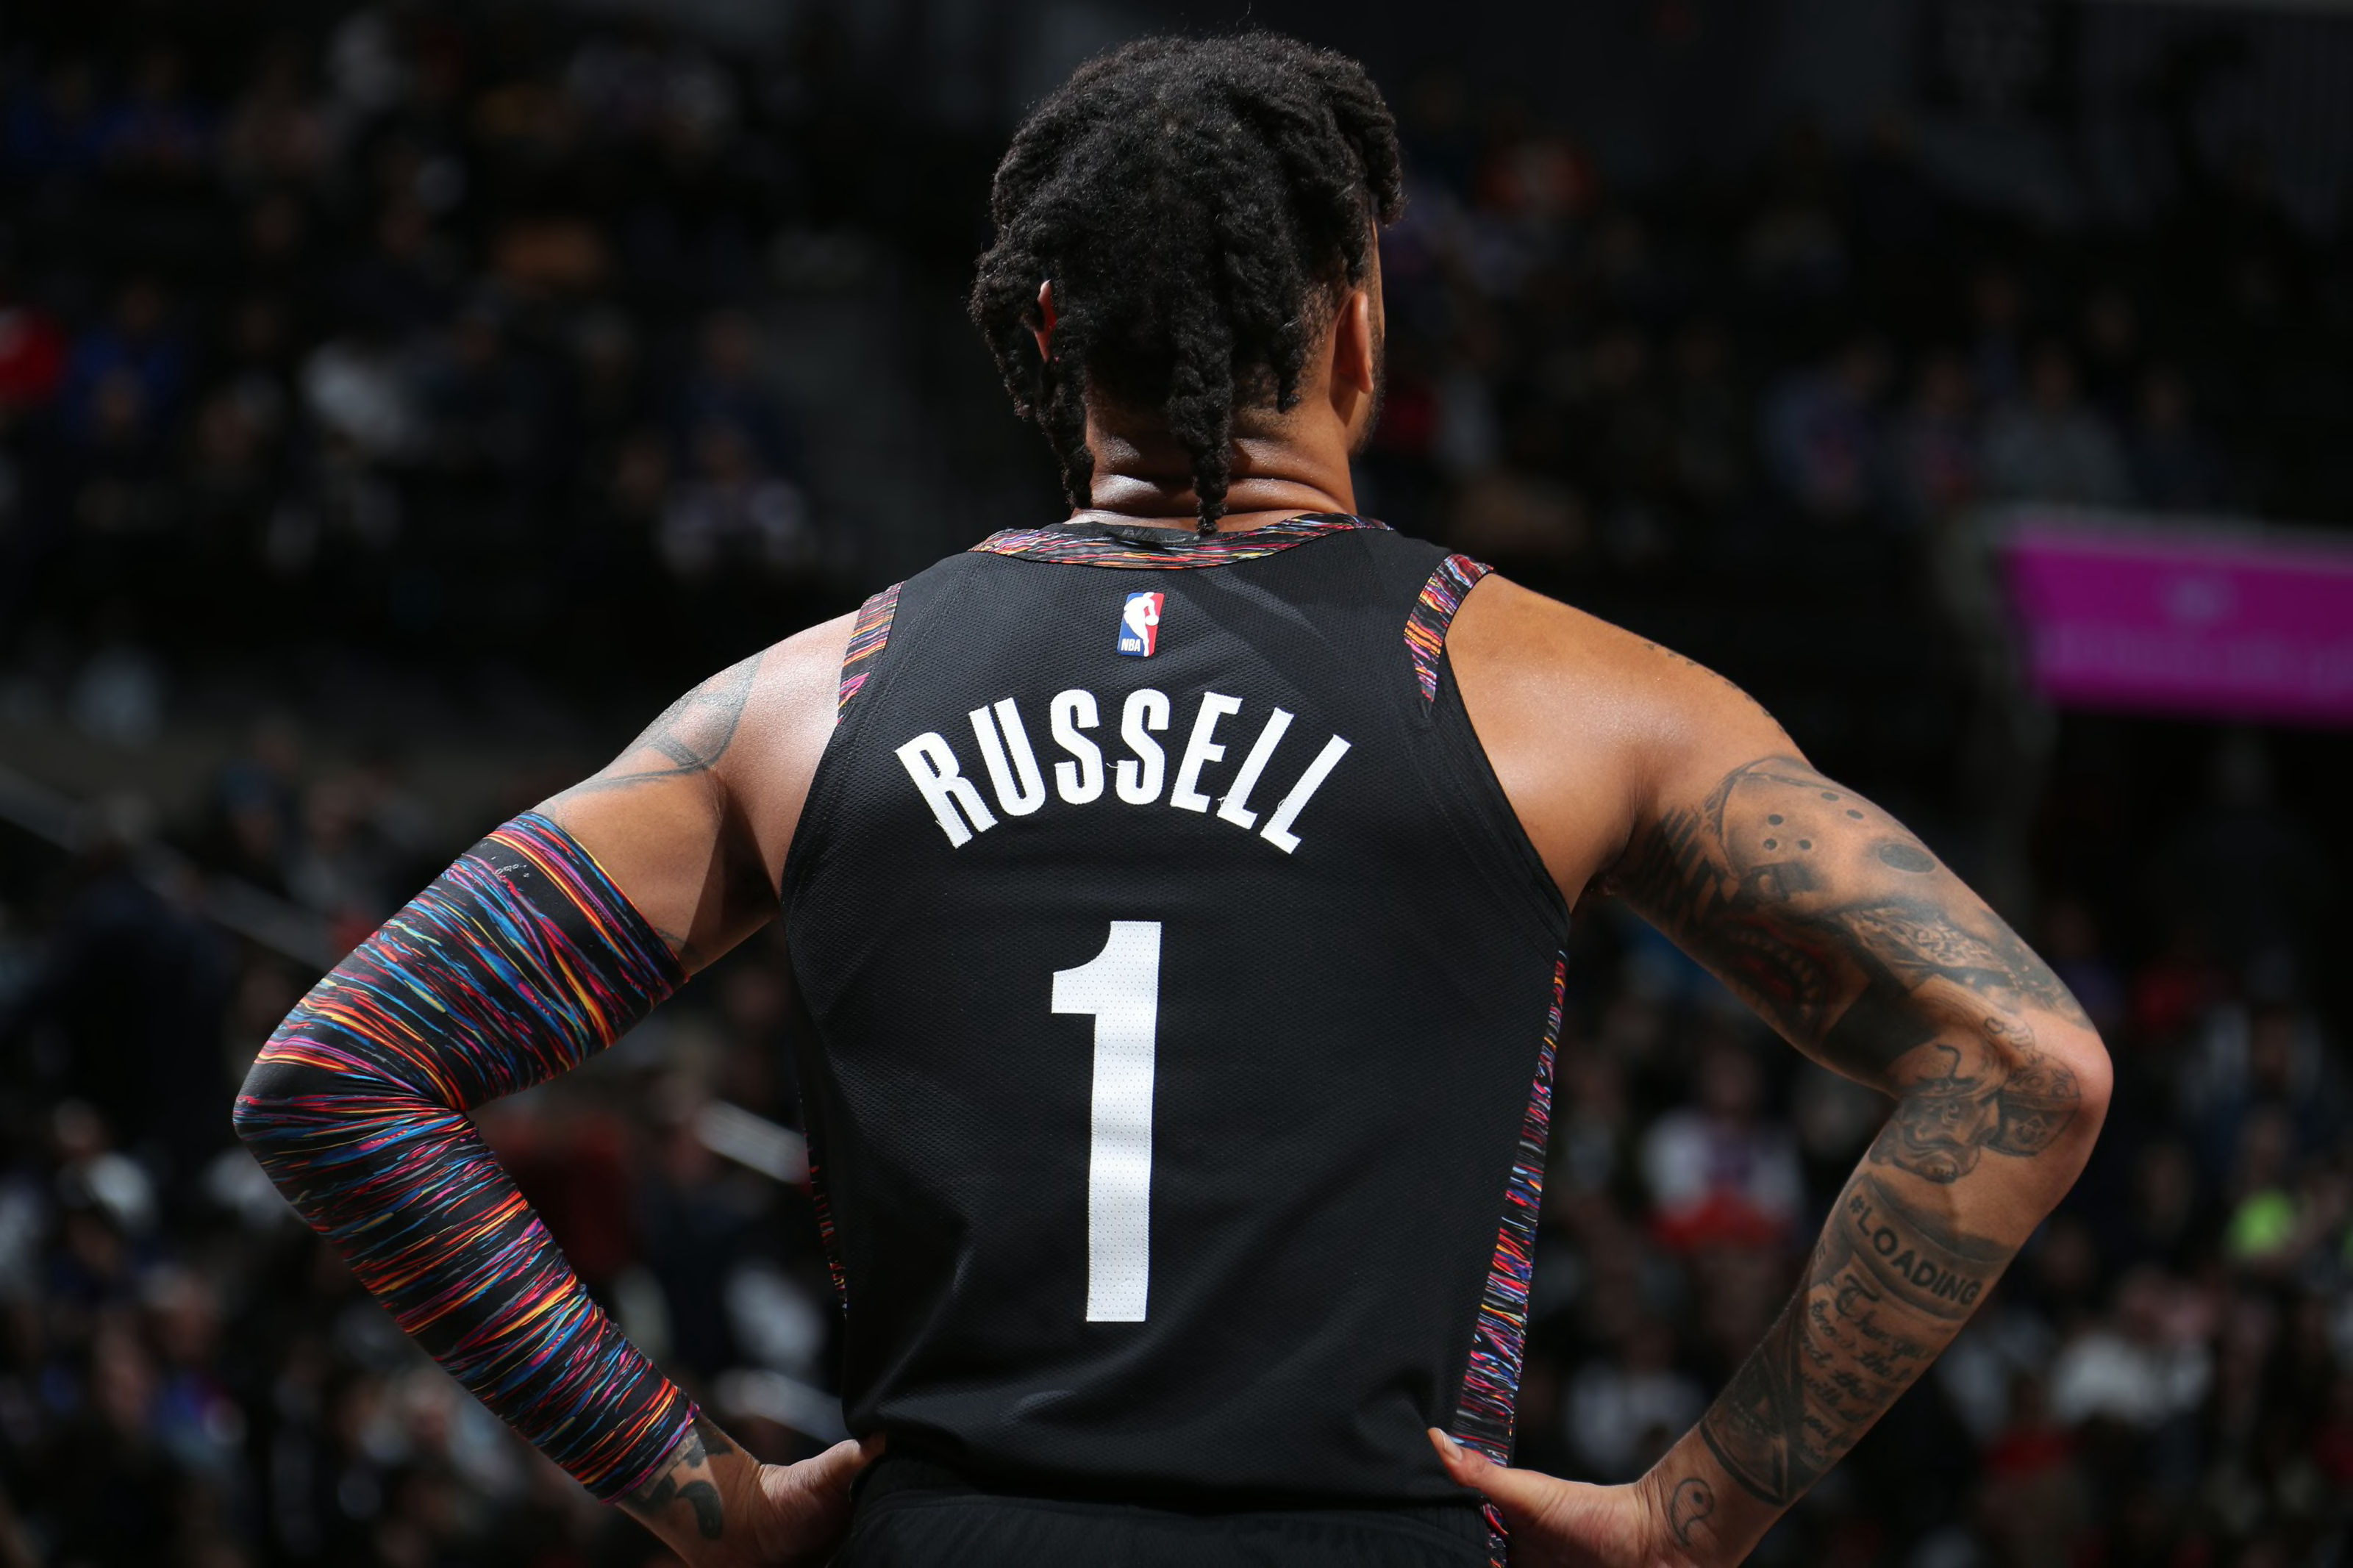 d'angelo russell 2018